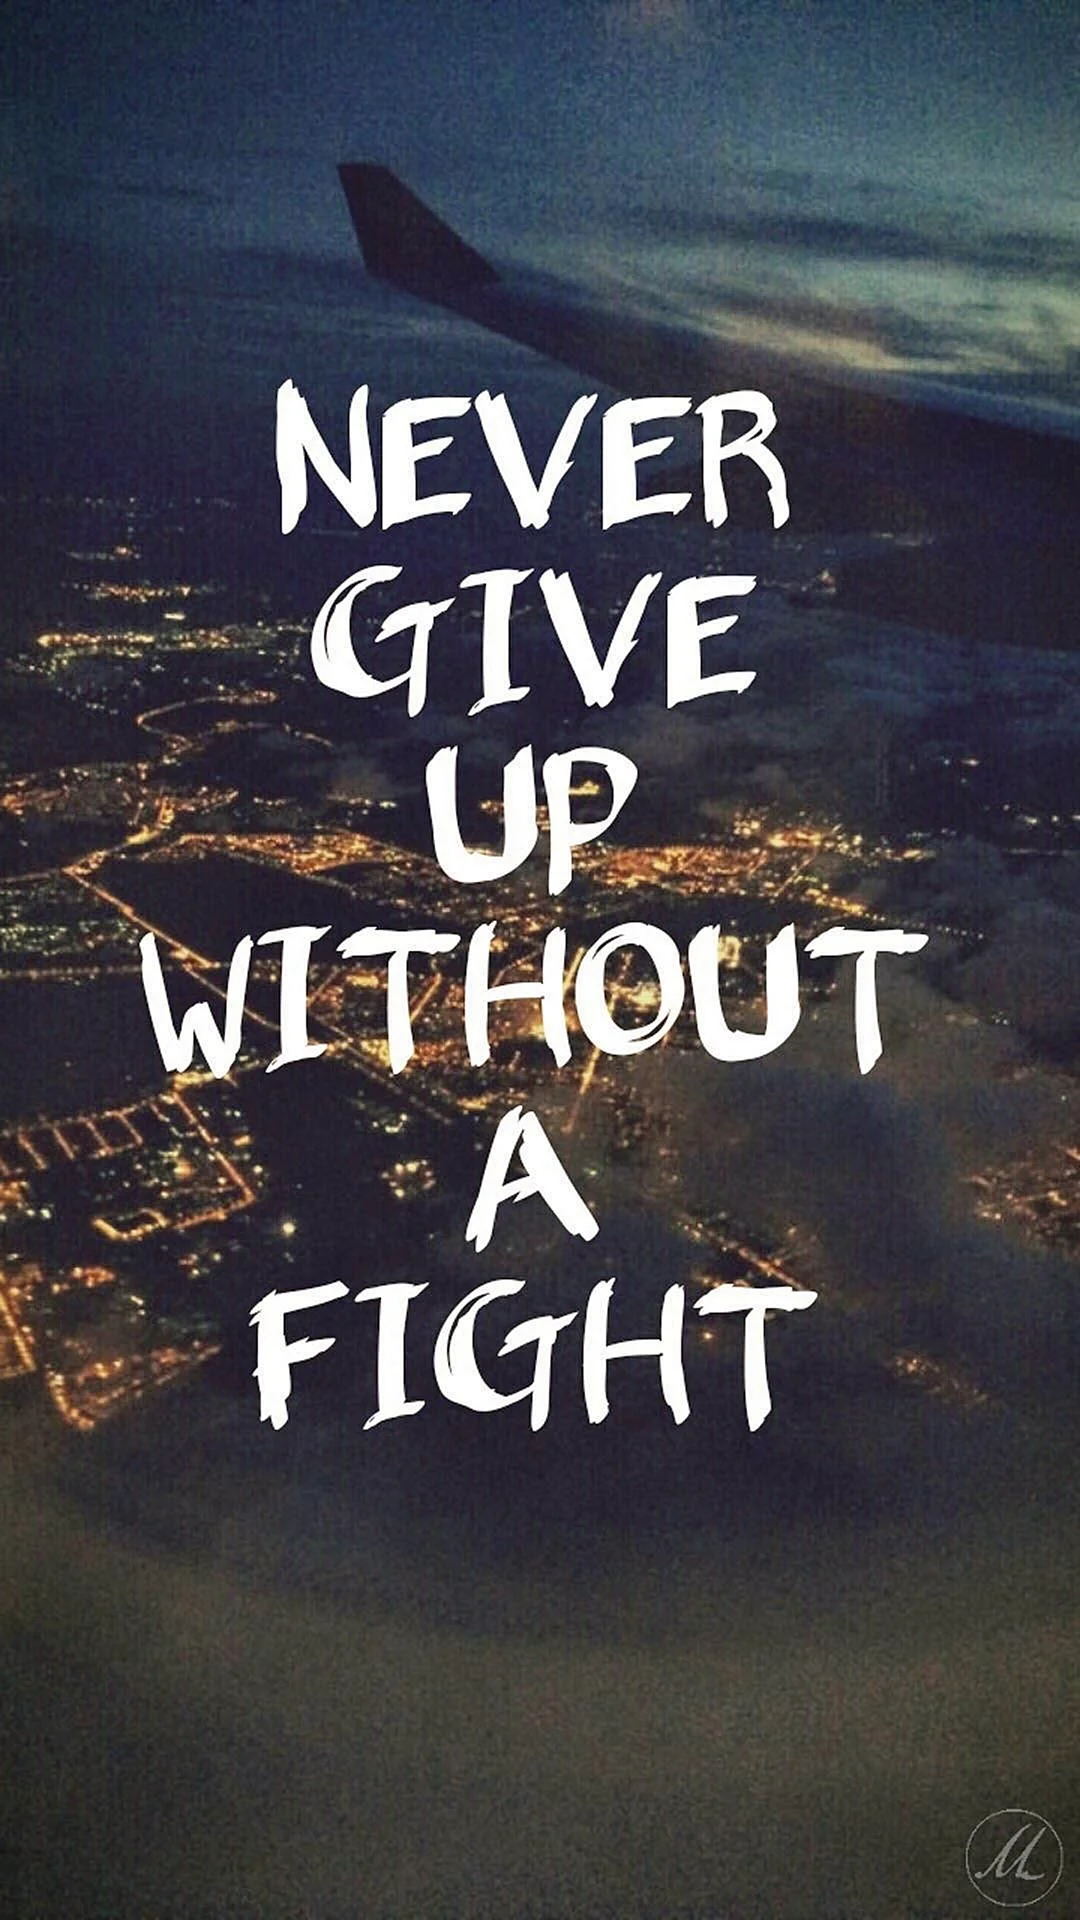 Never Give Up Wallpaper For iPhone